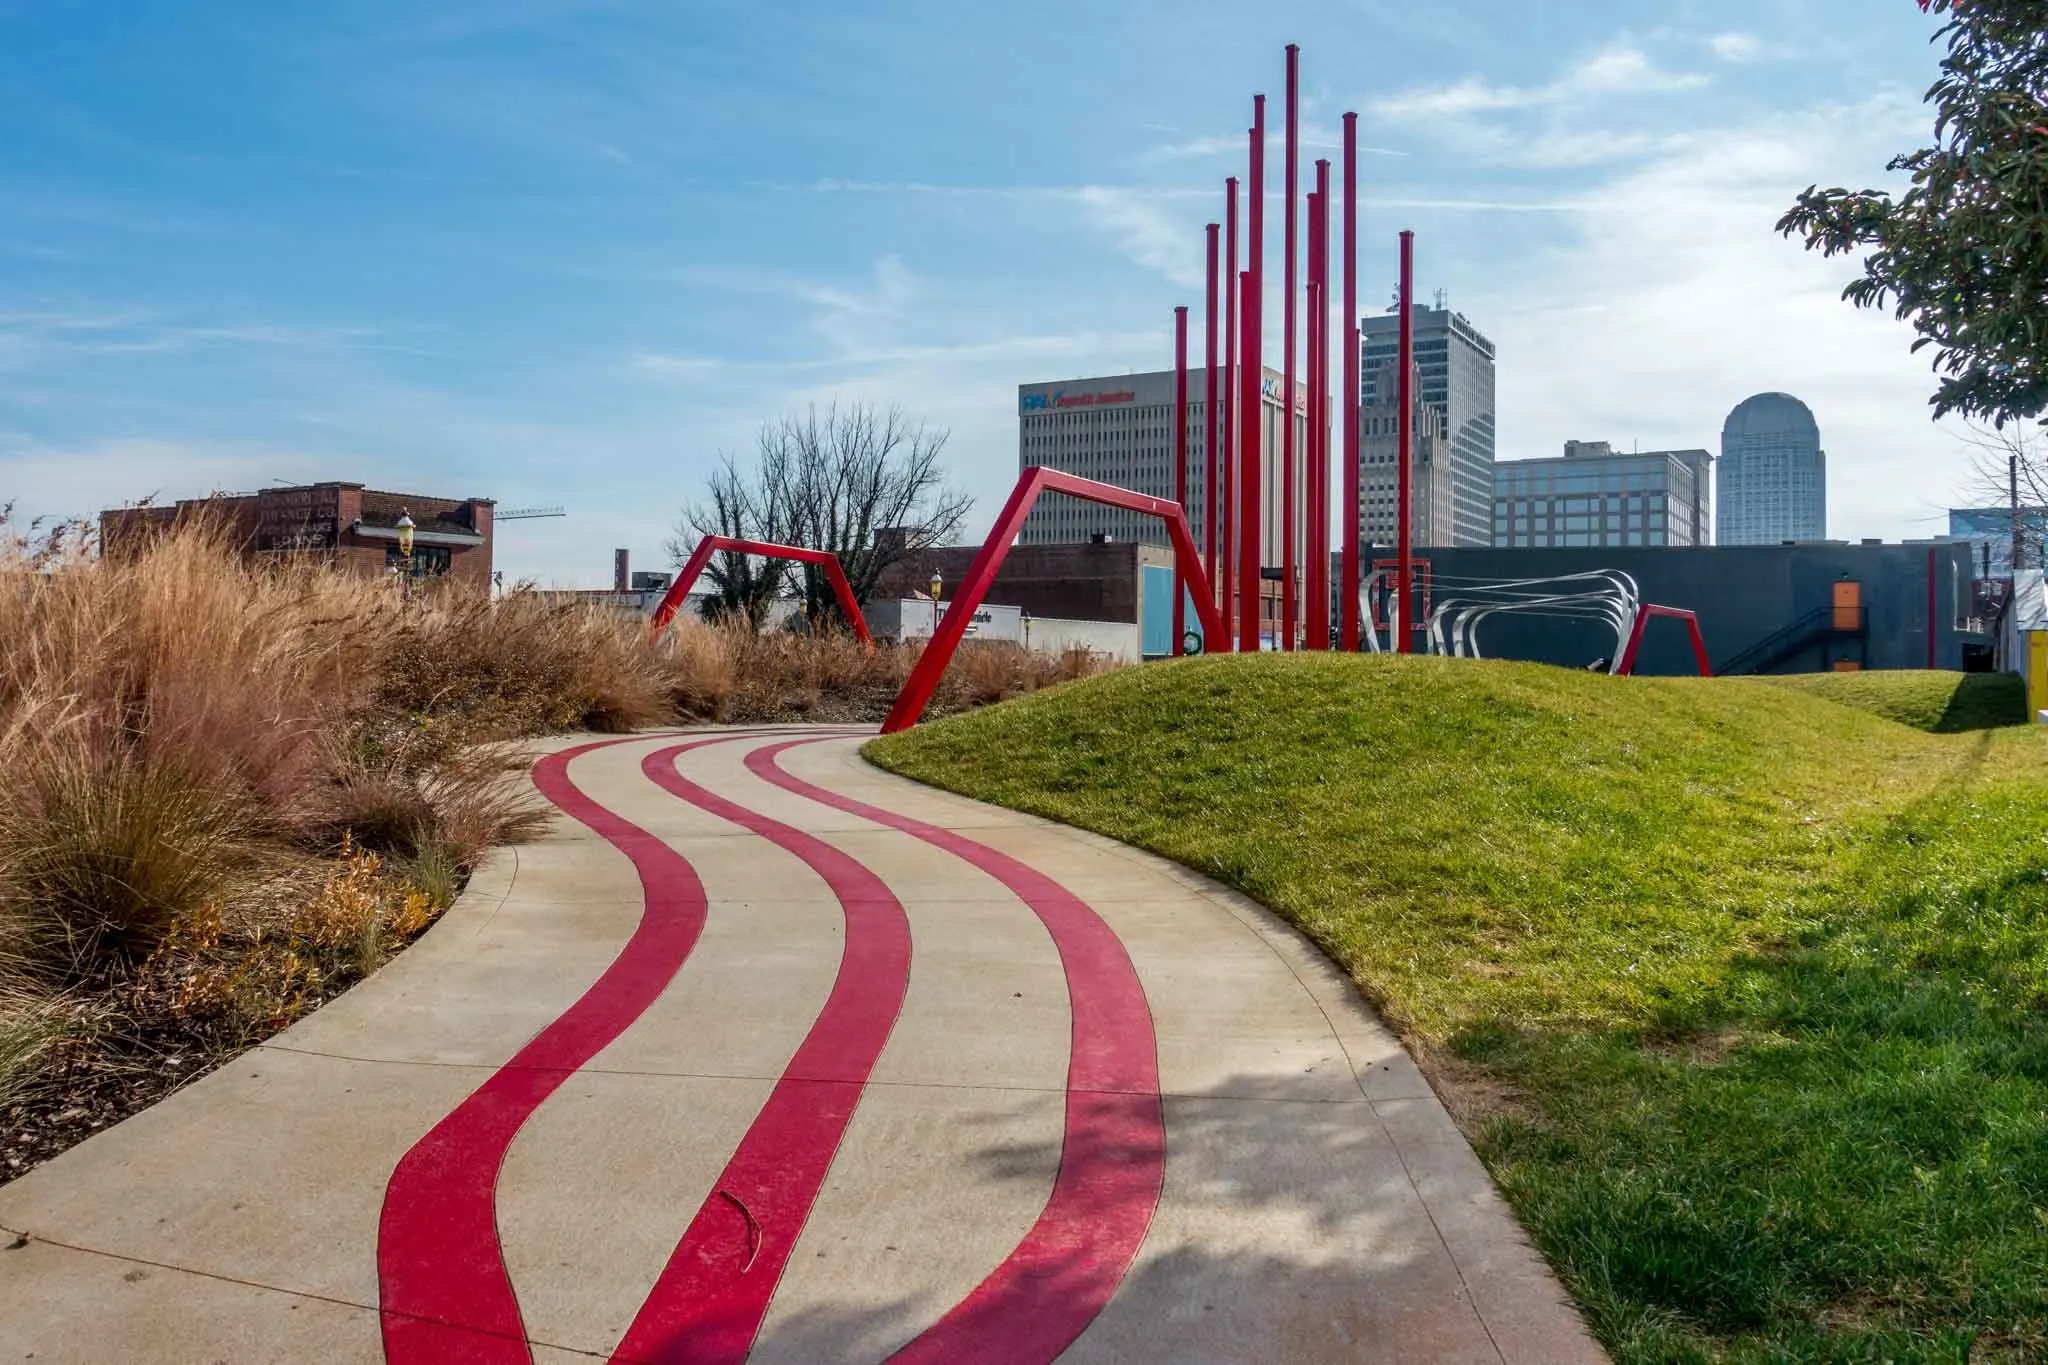 Outdoor artworks including a red sidewalk trail leading to a red sculpture